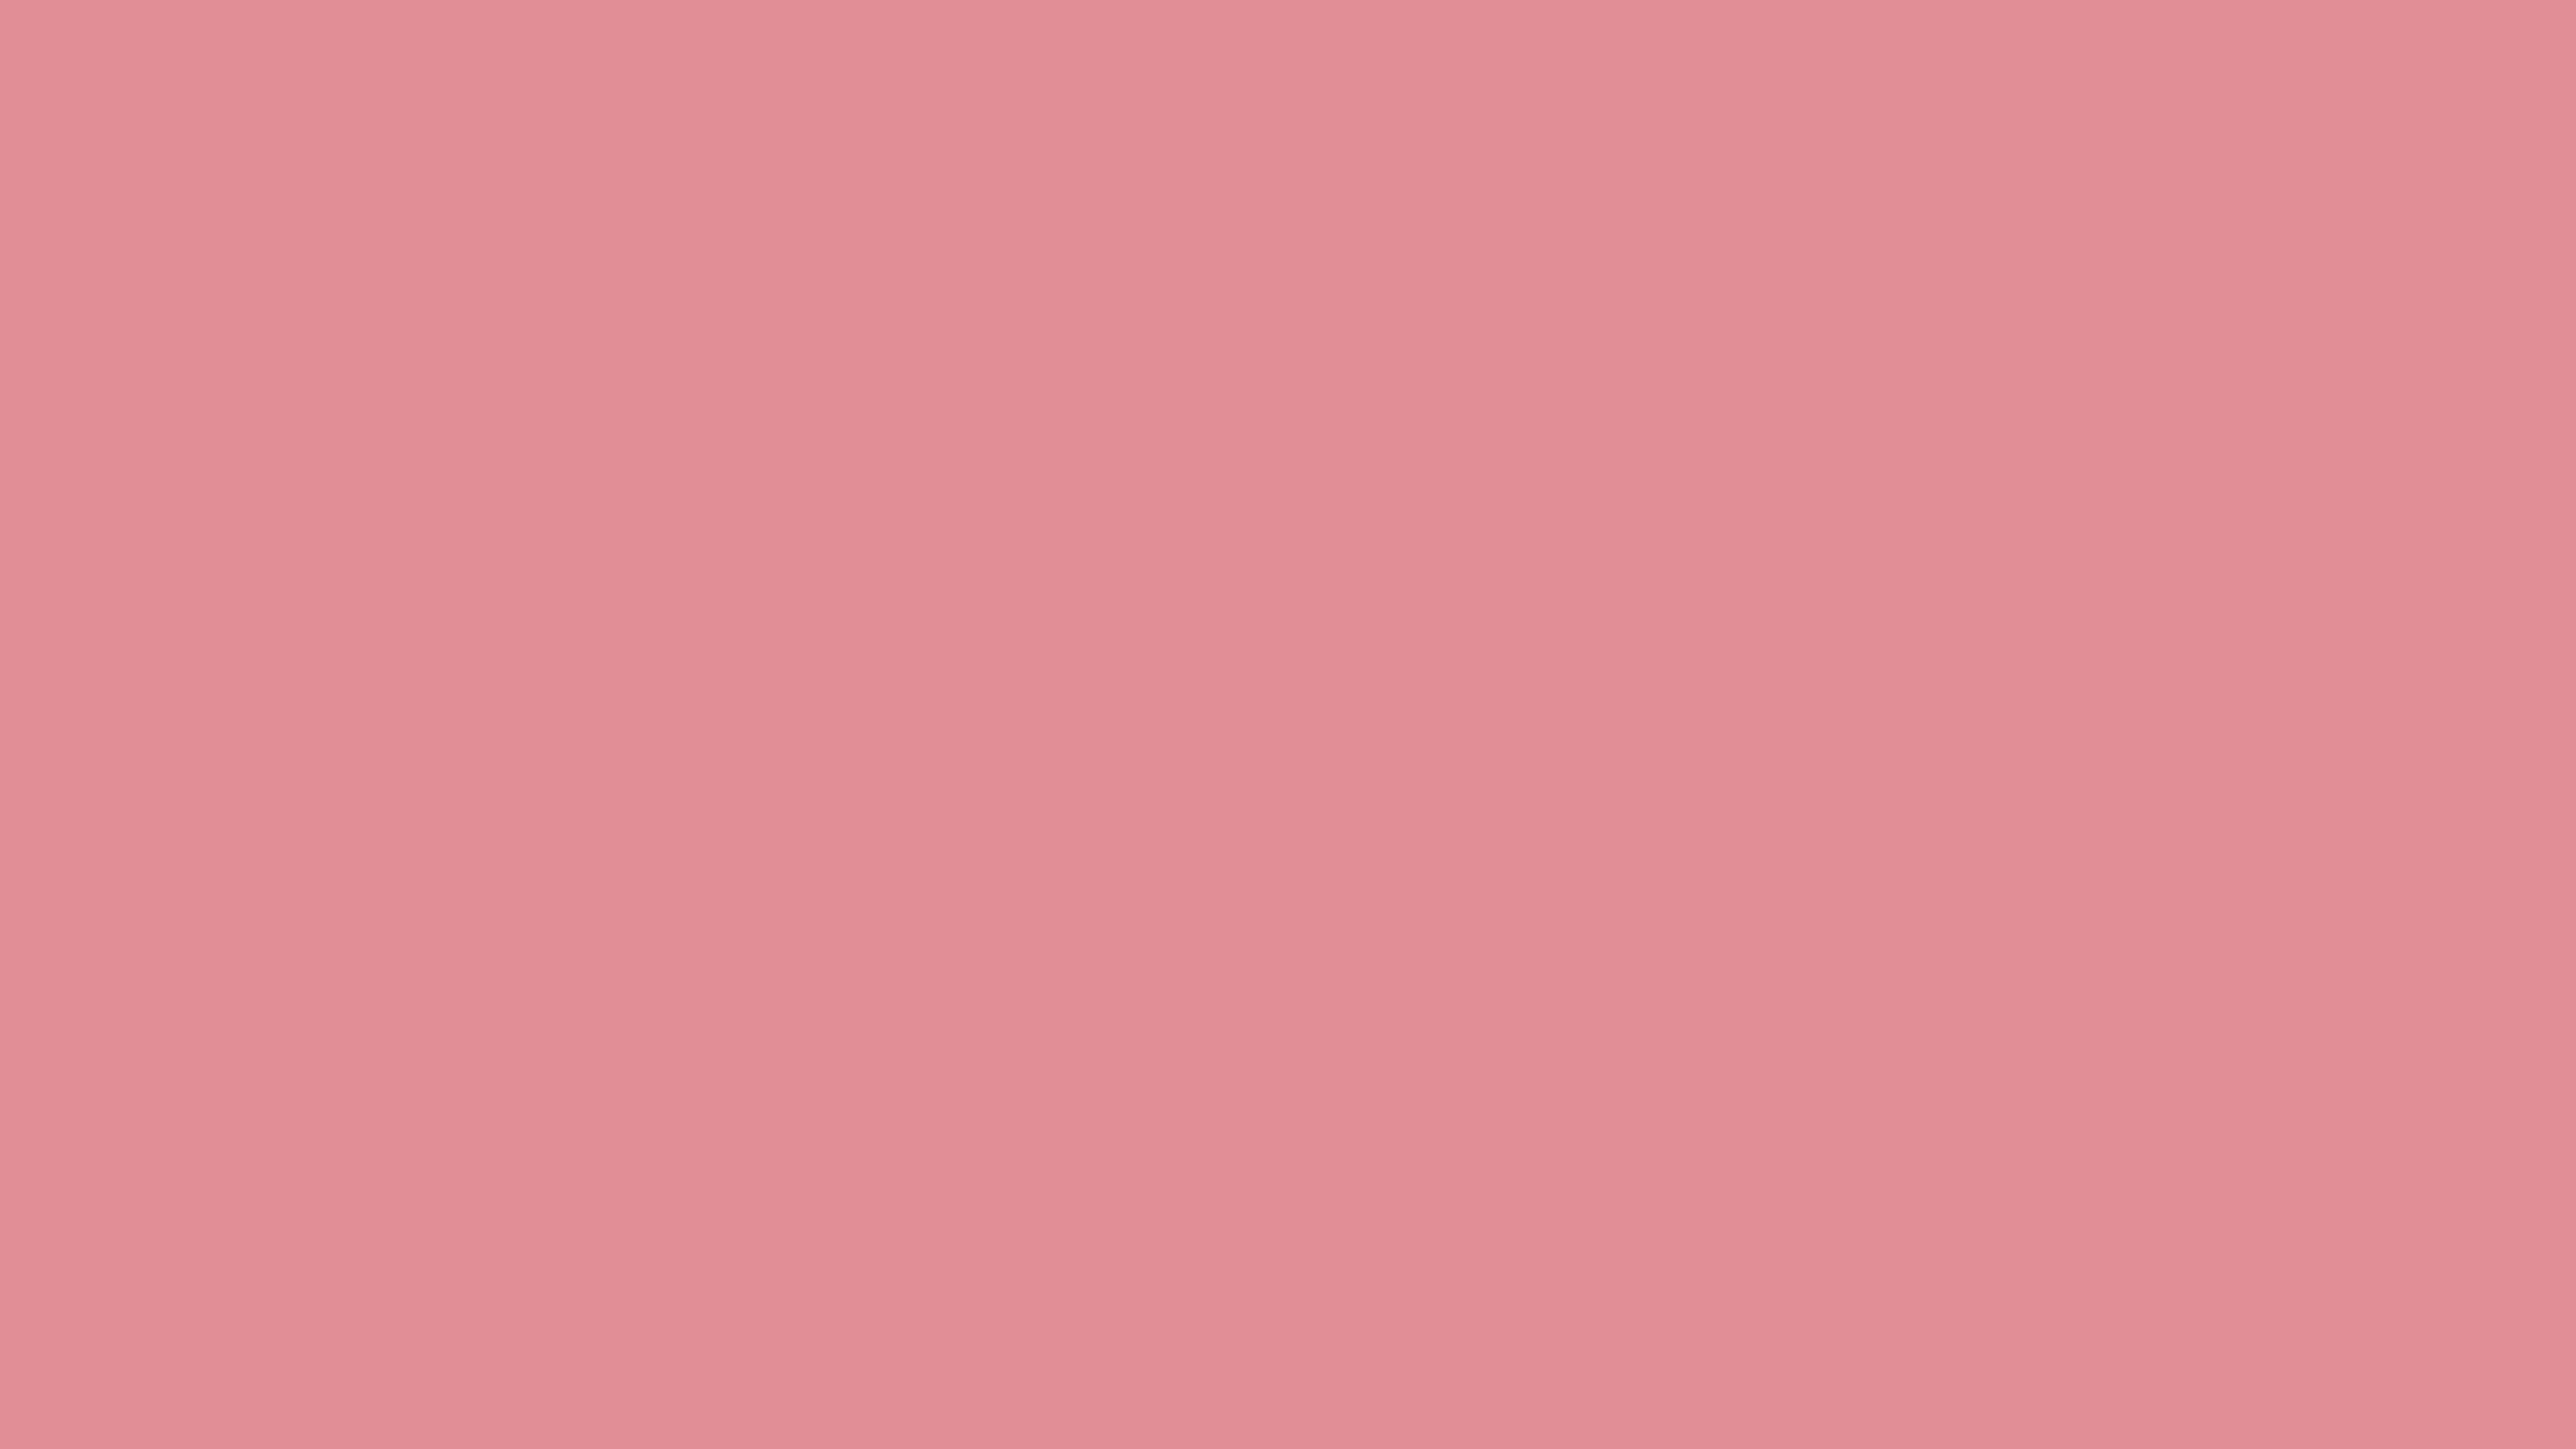 3840x2160 Ruddy Pink Solid Color Background